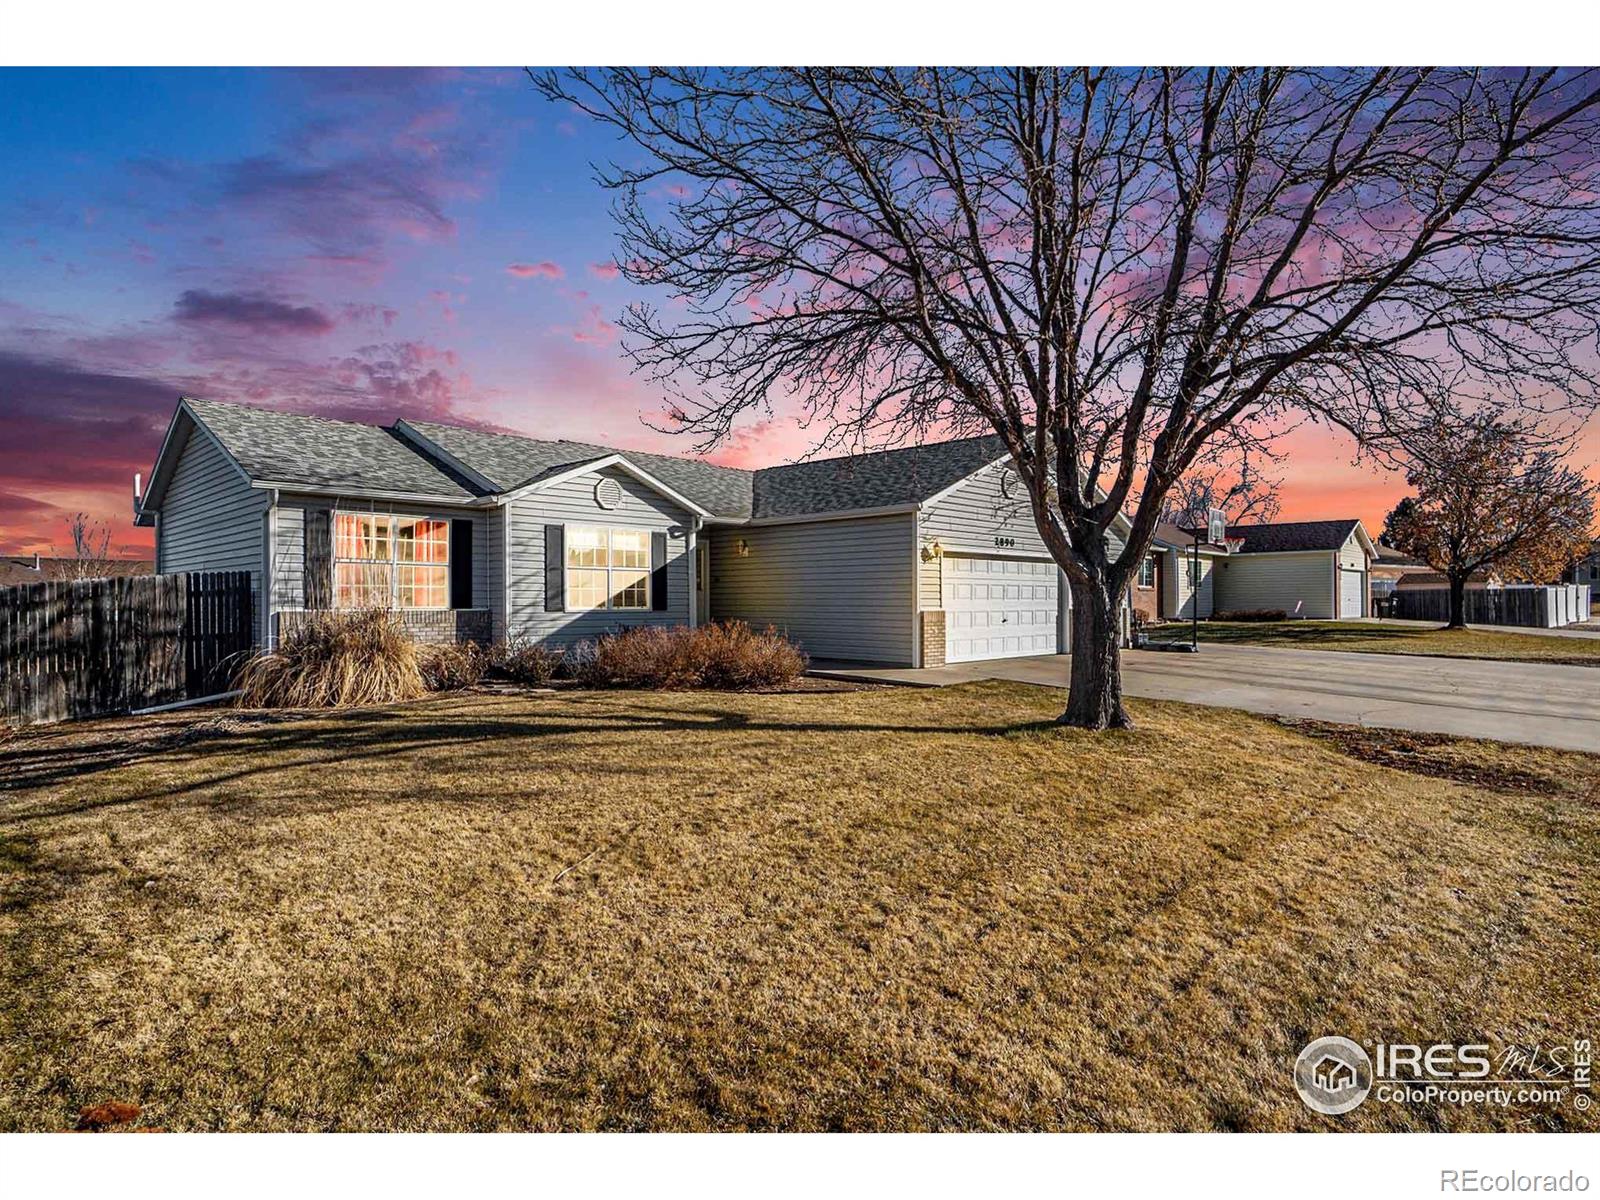 2890  43rd Avenue, greeley MLS: 4567891002462 Beds: 4 Baths: 3 Price: $489,900